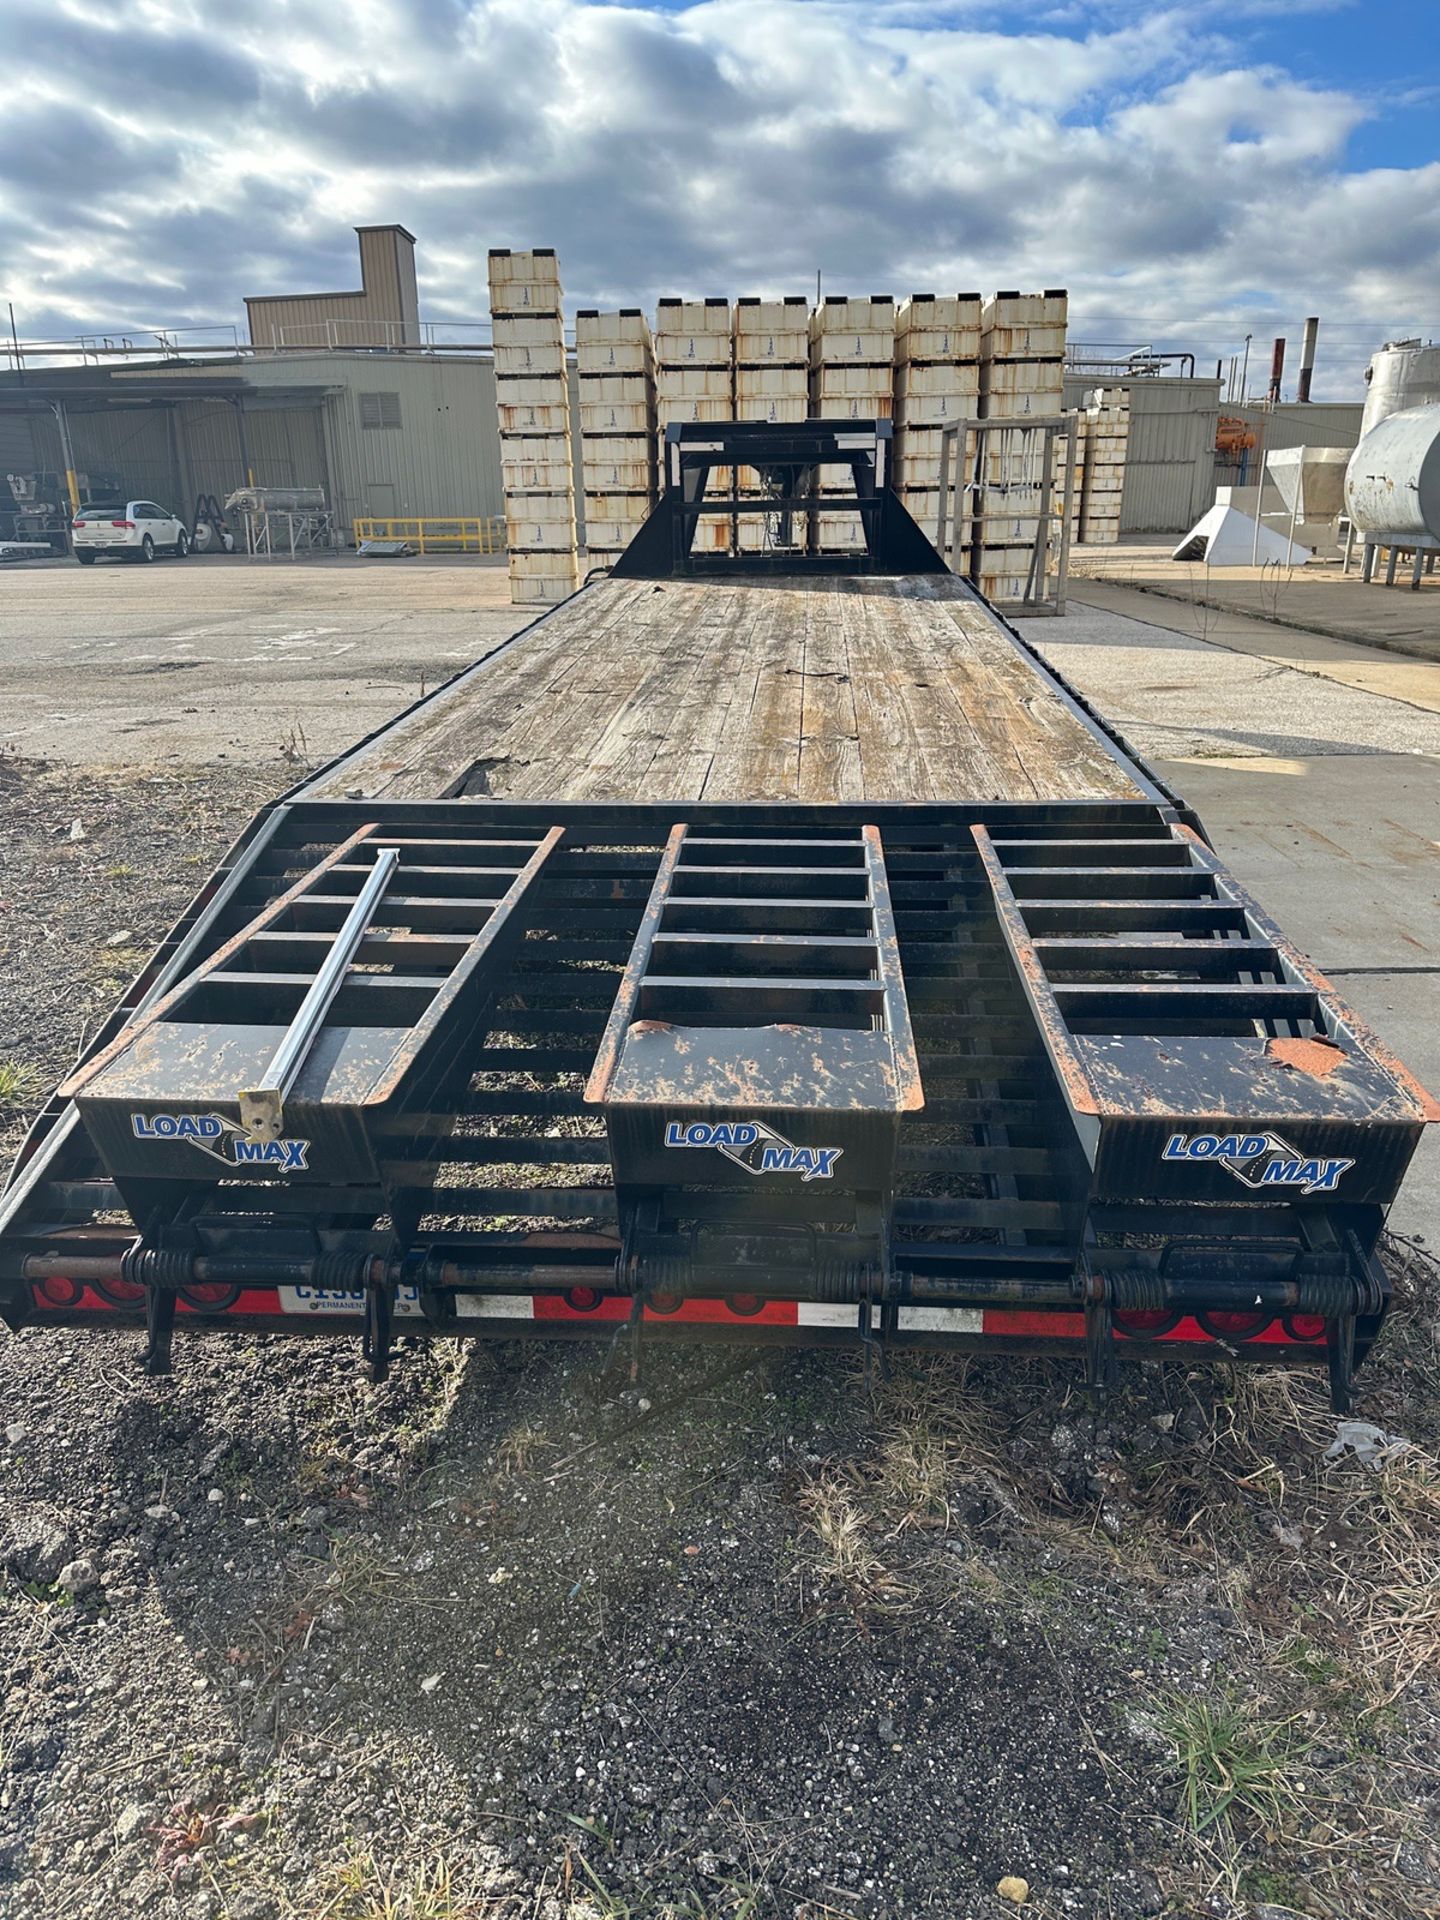 Load Max Gooseneck Trailer (Approx. 8' x 20'), Lights Need Wiring Repair | Rig Fee $100 - Image 2 of 4